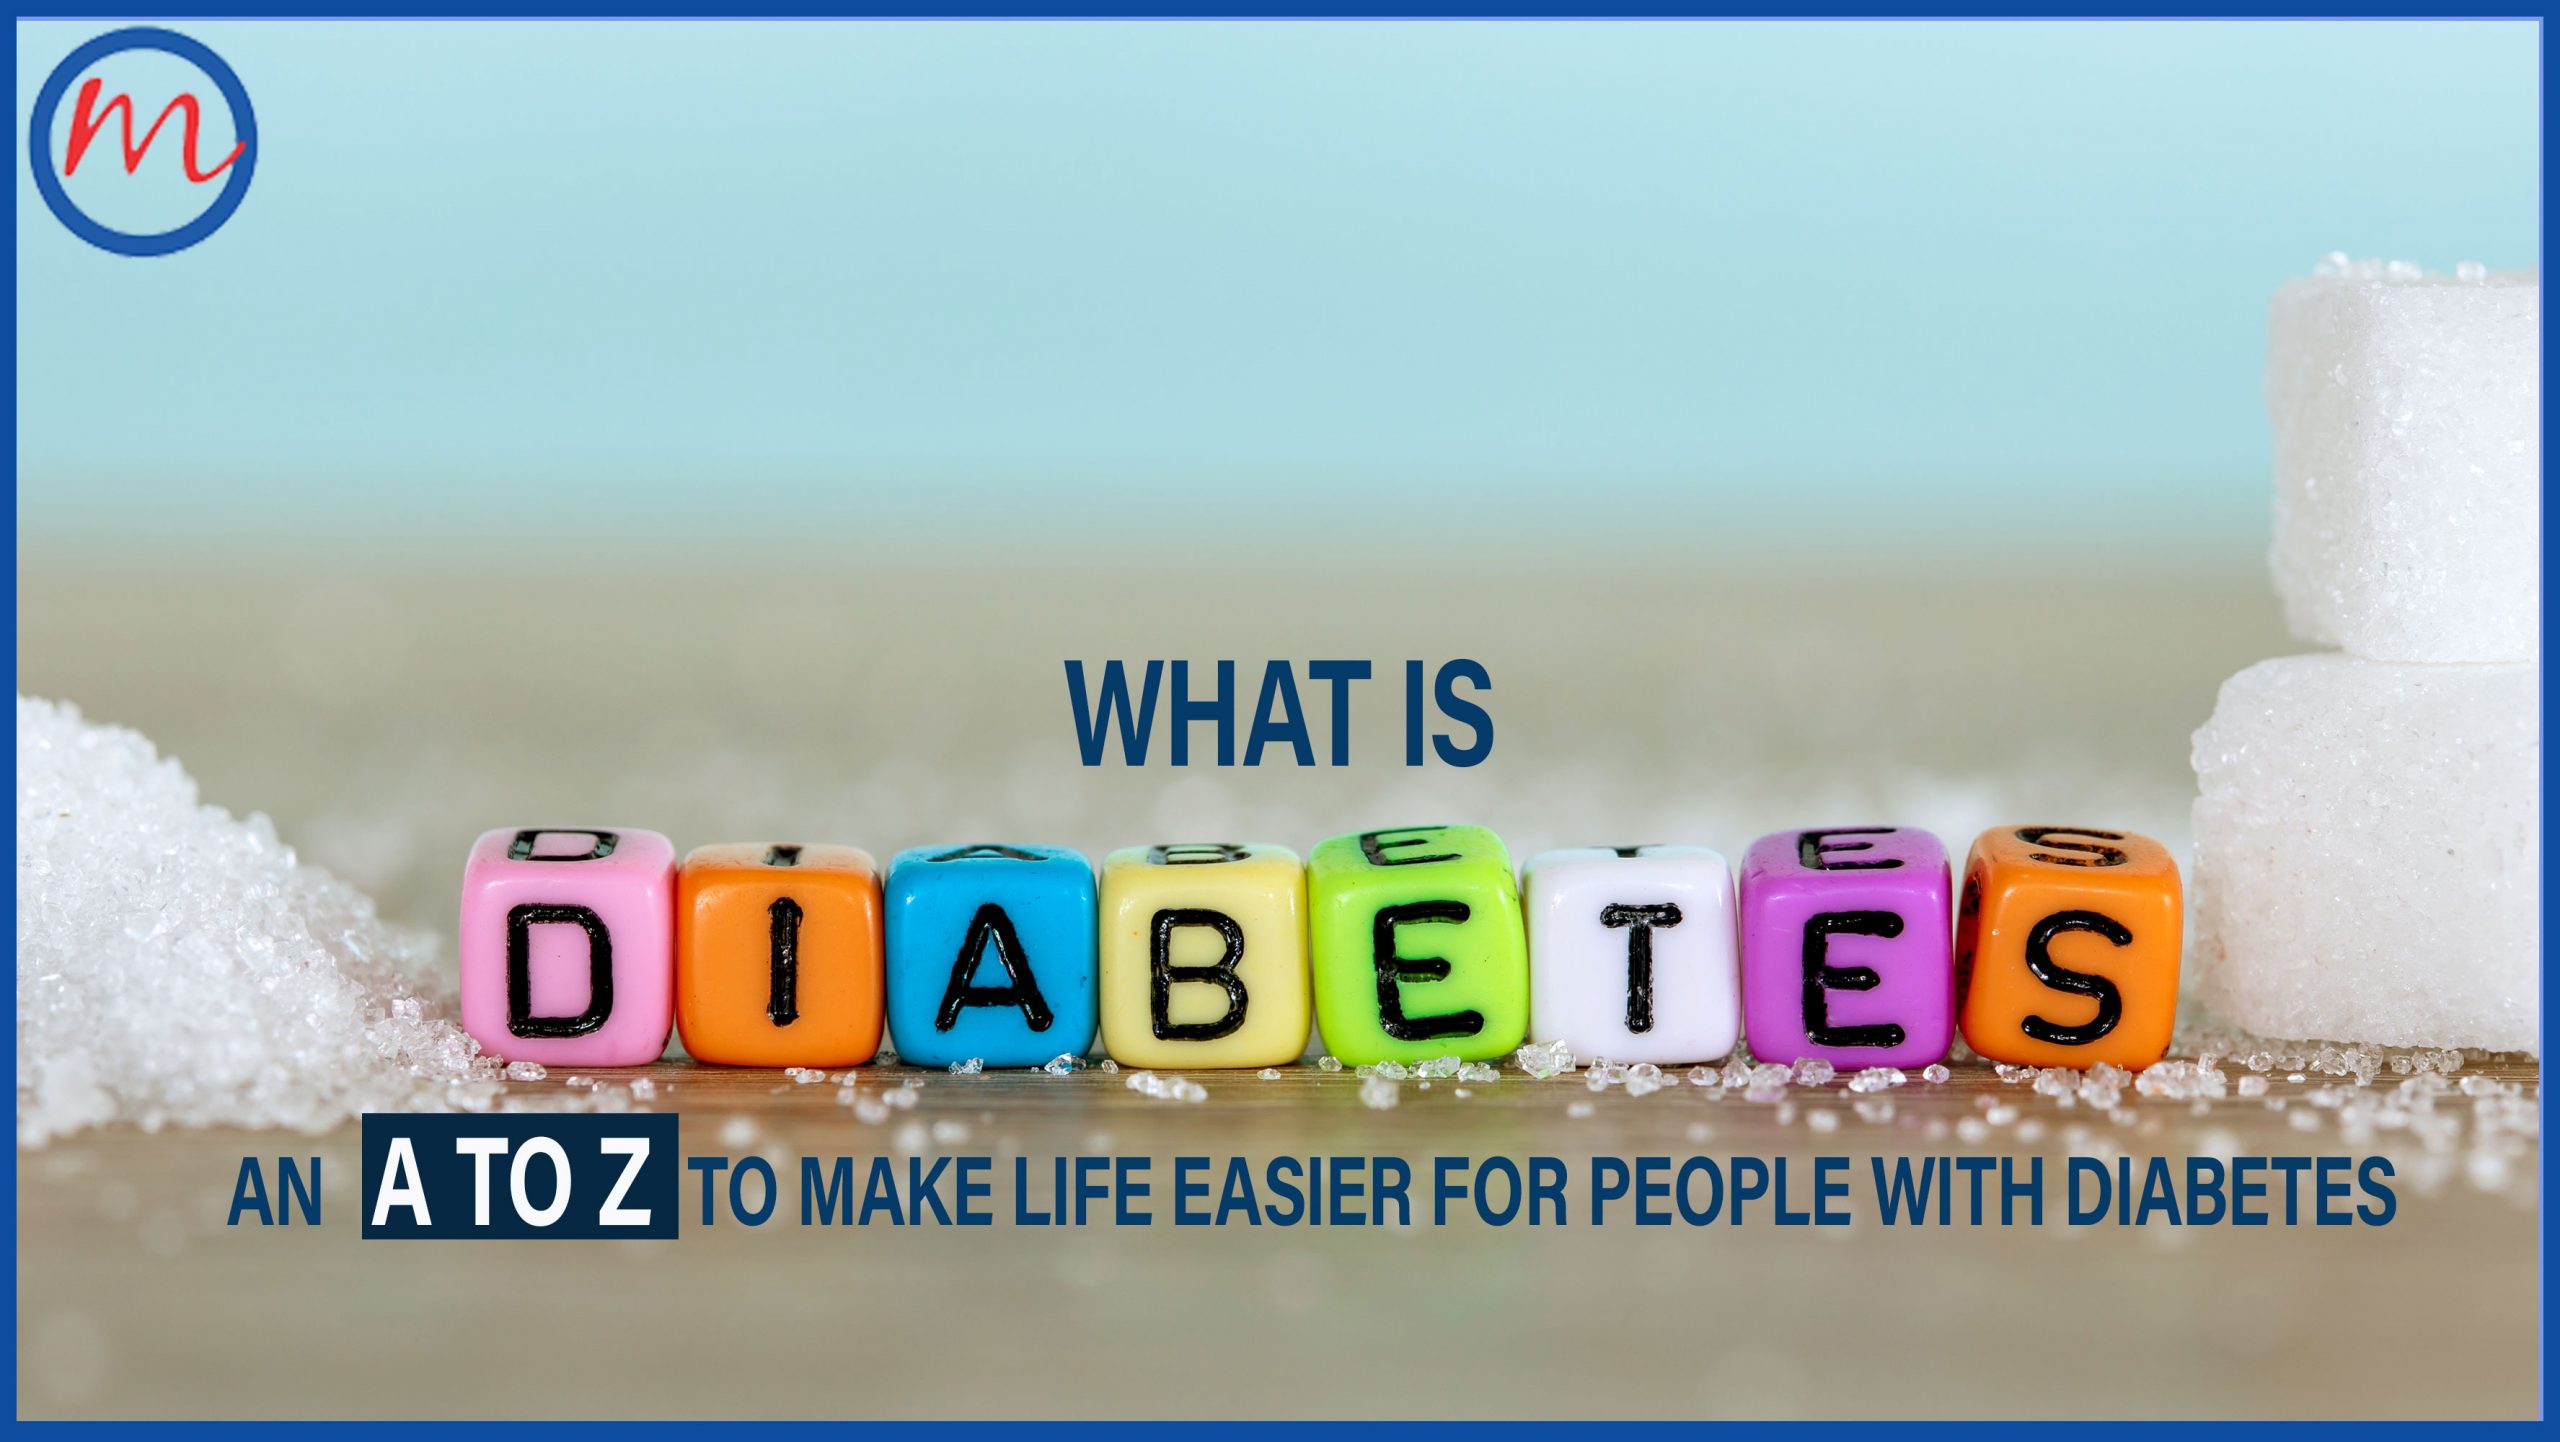 WHAT IS DIABETES? An A to Z to make life easier for patients